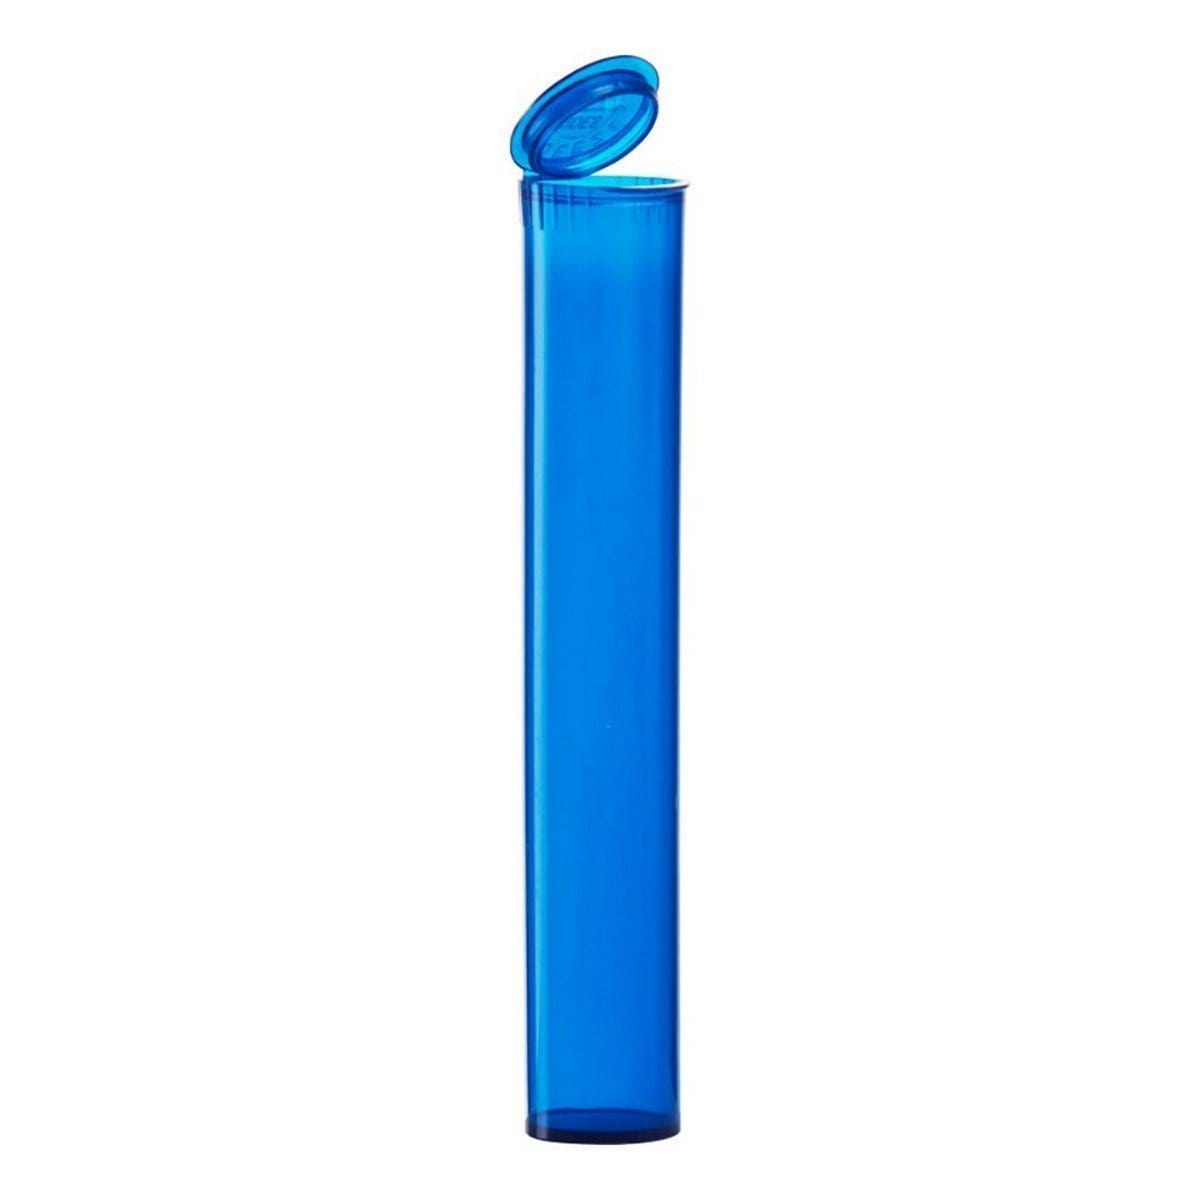 Translucent Blue Translucent Squeeze Top Child-Resistant Pre-Roll Tube | 94 mm